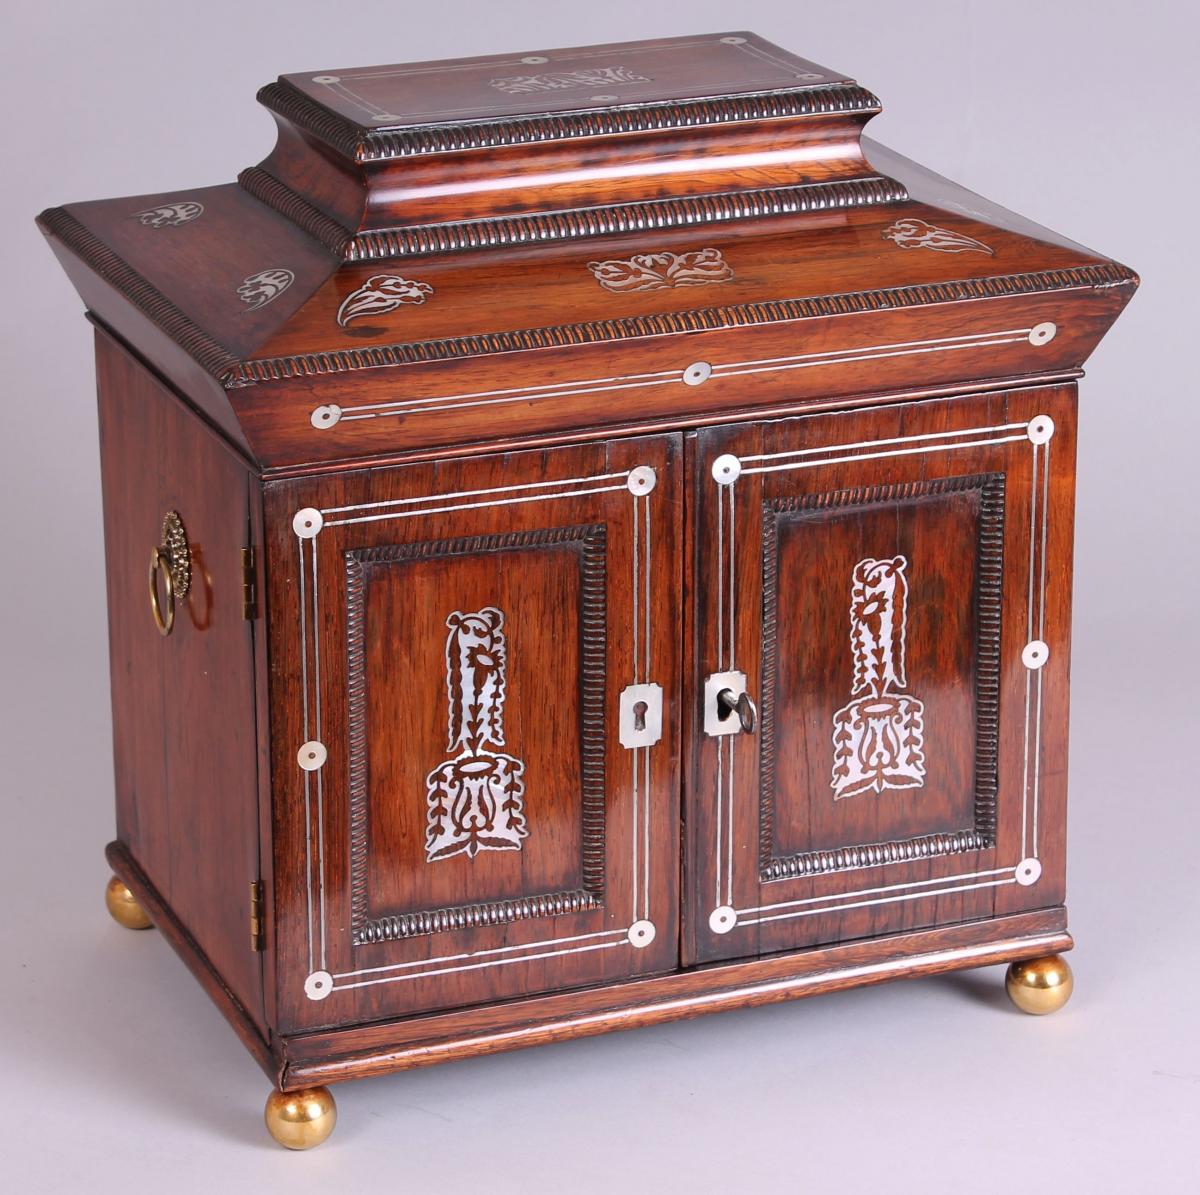 William IV period rosewood and mother-of-pearl inlaid lady's table compendium